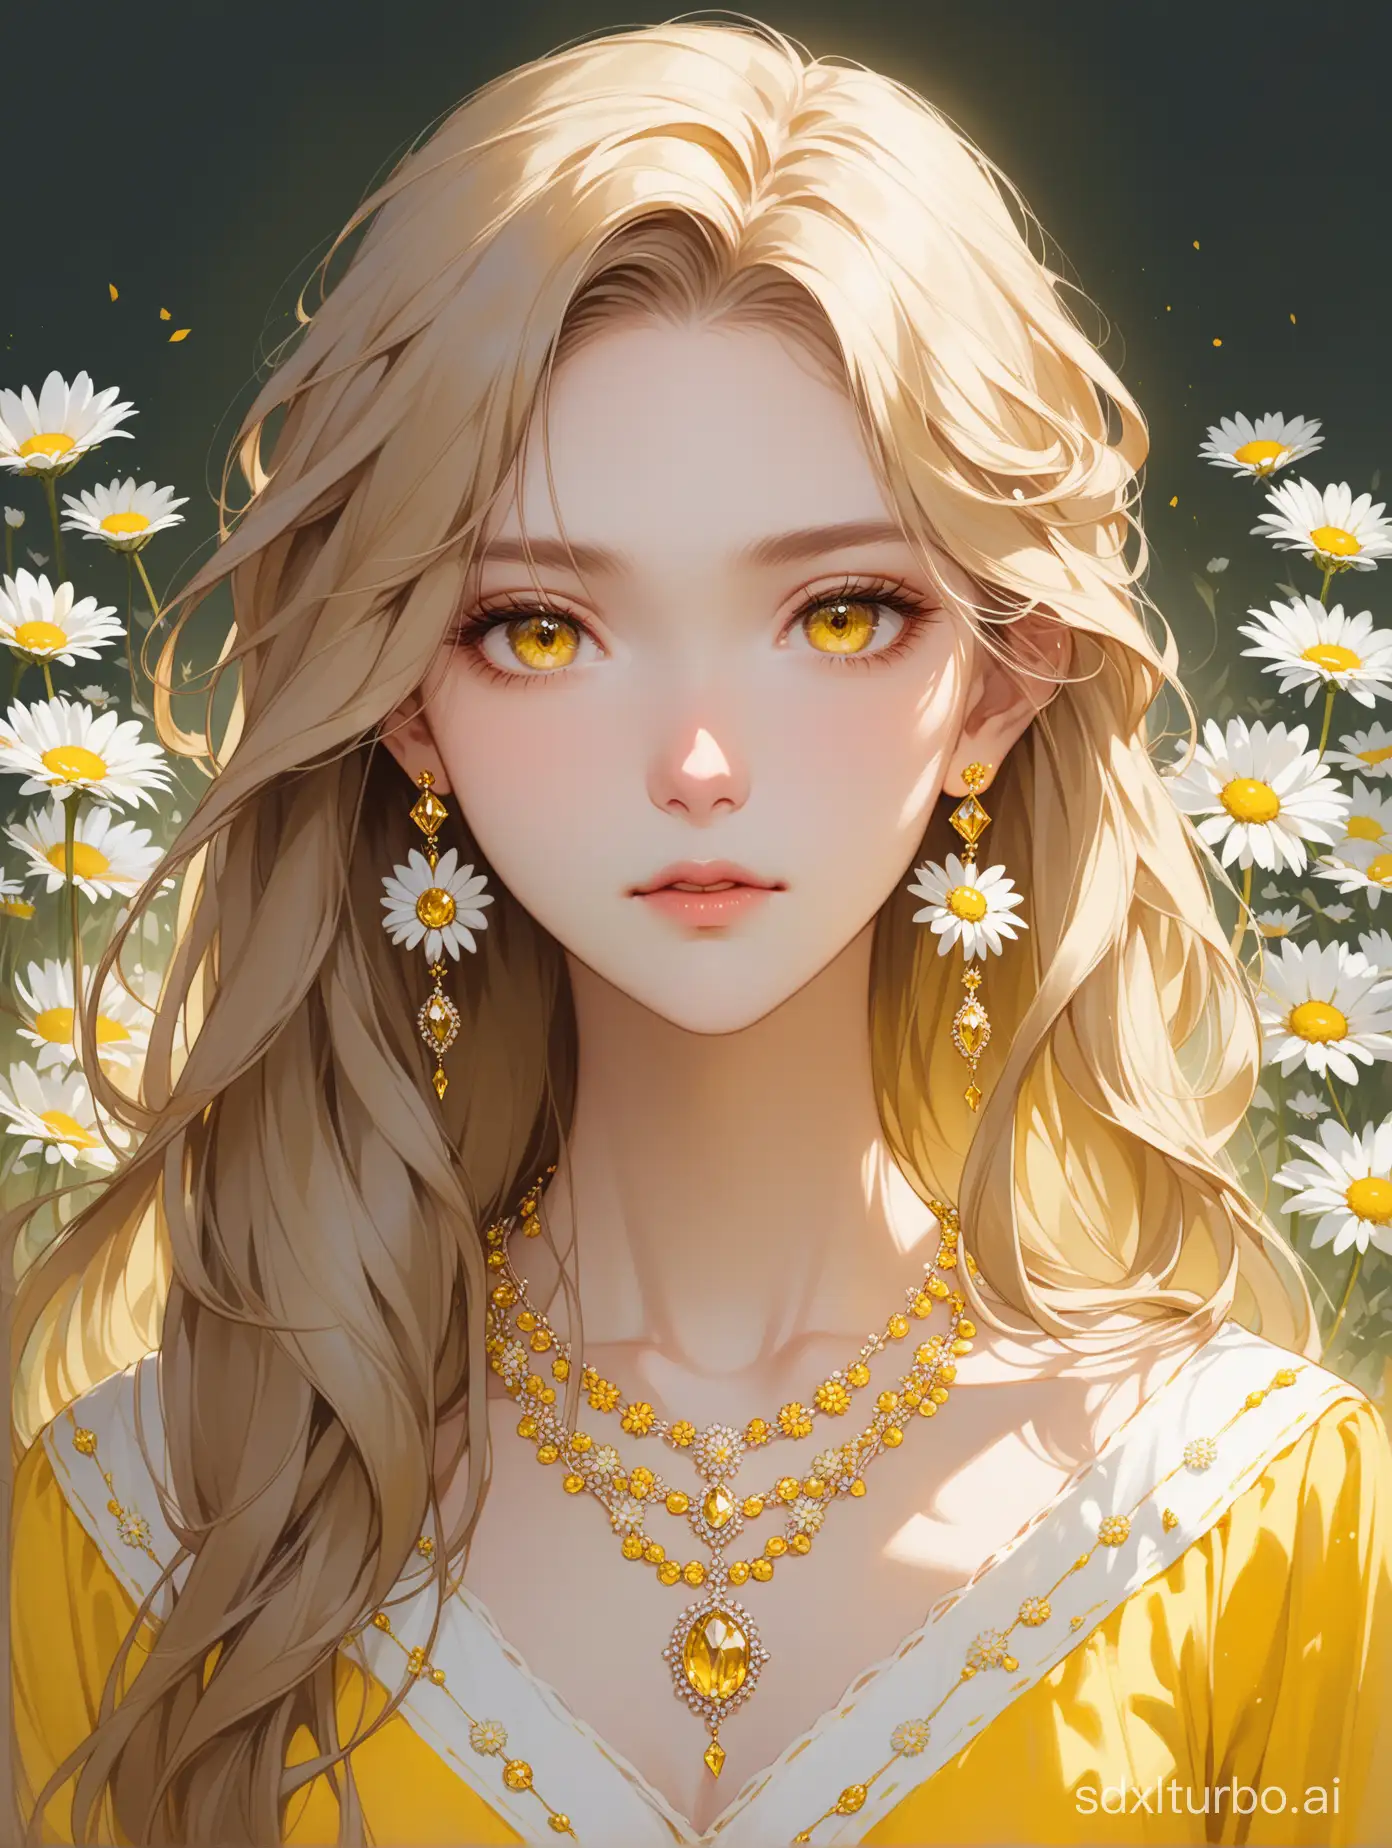 Highest quality, masterpiece, a girl, light brown long hair, slightly curled hair, yellow earrings, necklace, (yellow and white attire), (exquisite hair depiction), (exquisite yellow eyes depiction), (exquisite facial features depiction), solo, (daisies), portrait description, solid color background, sense of brokenness